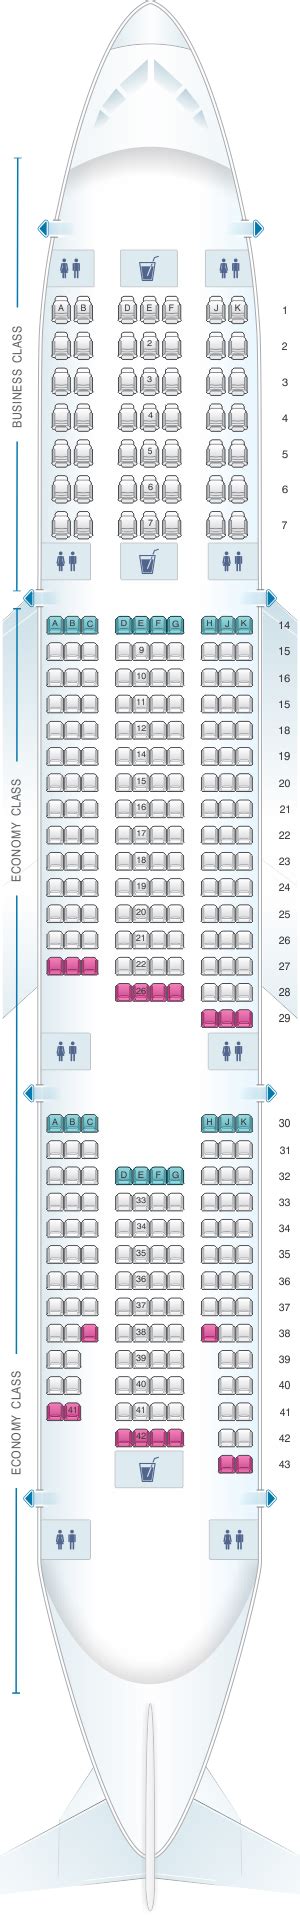 Emirates Seating Chart 777 300er Elcho Table